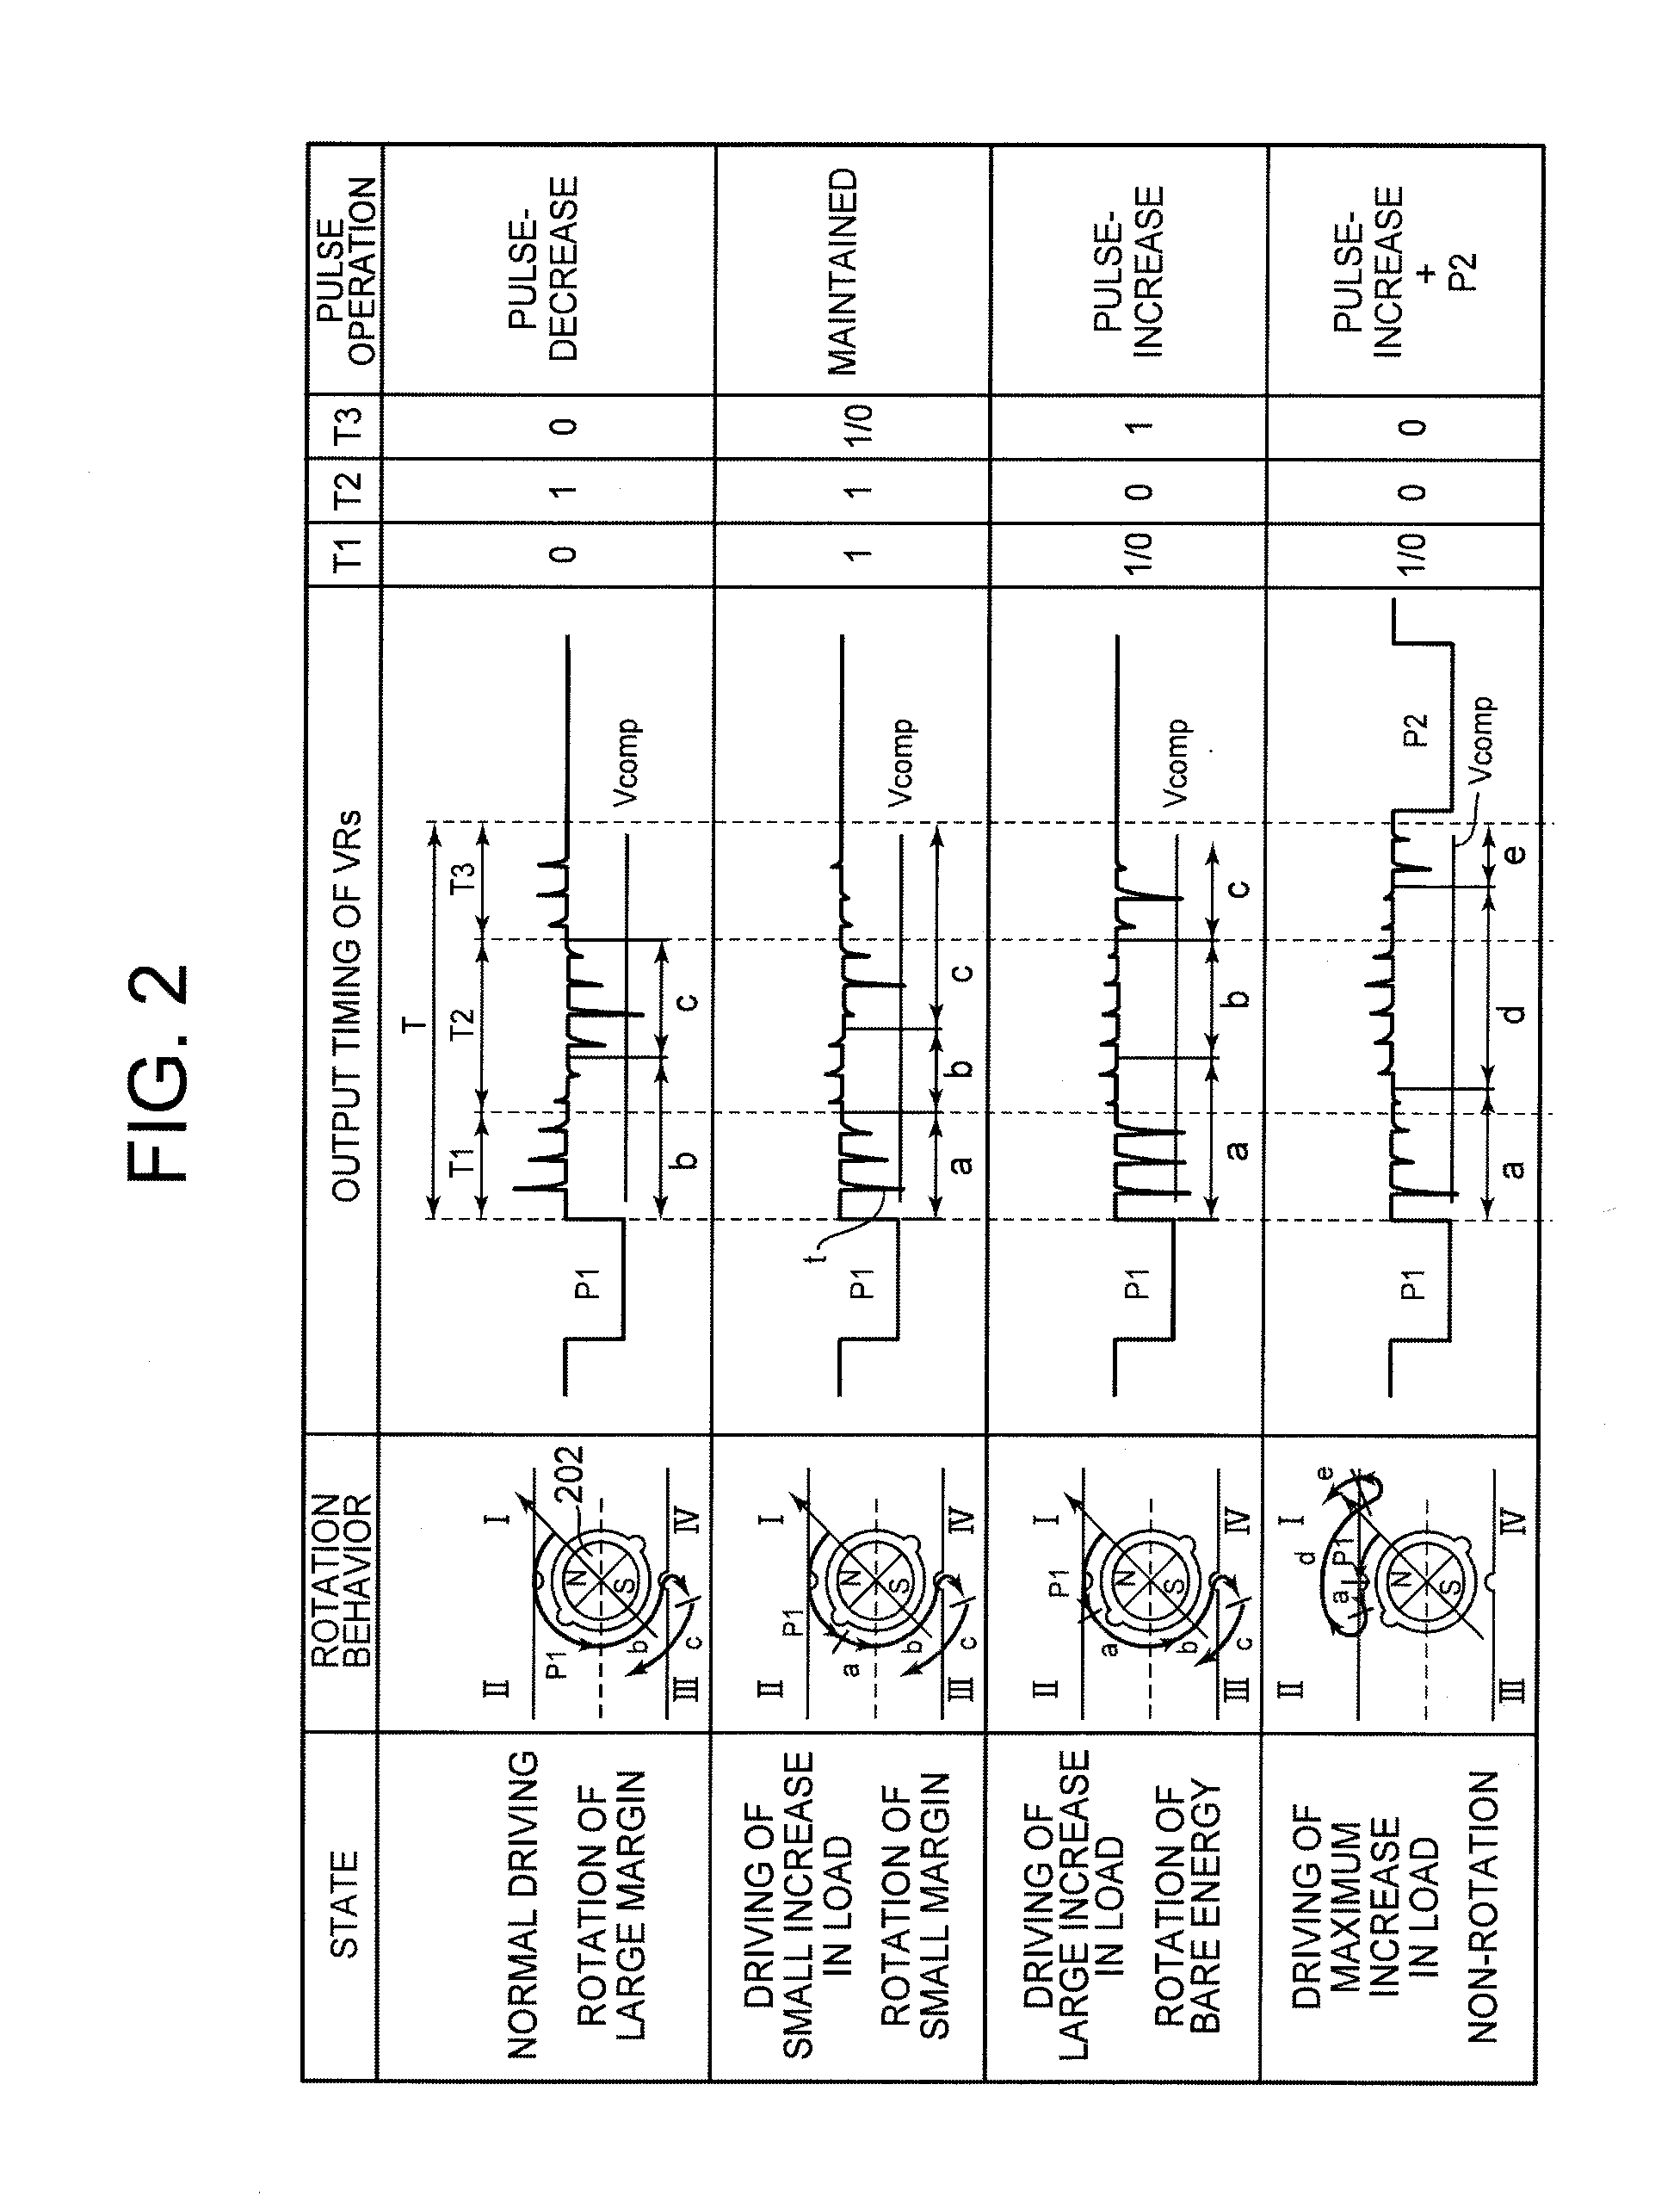 Stepping motor control circuit and analog electronic timepiece